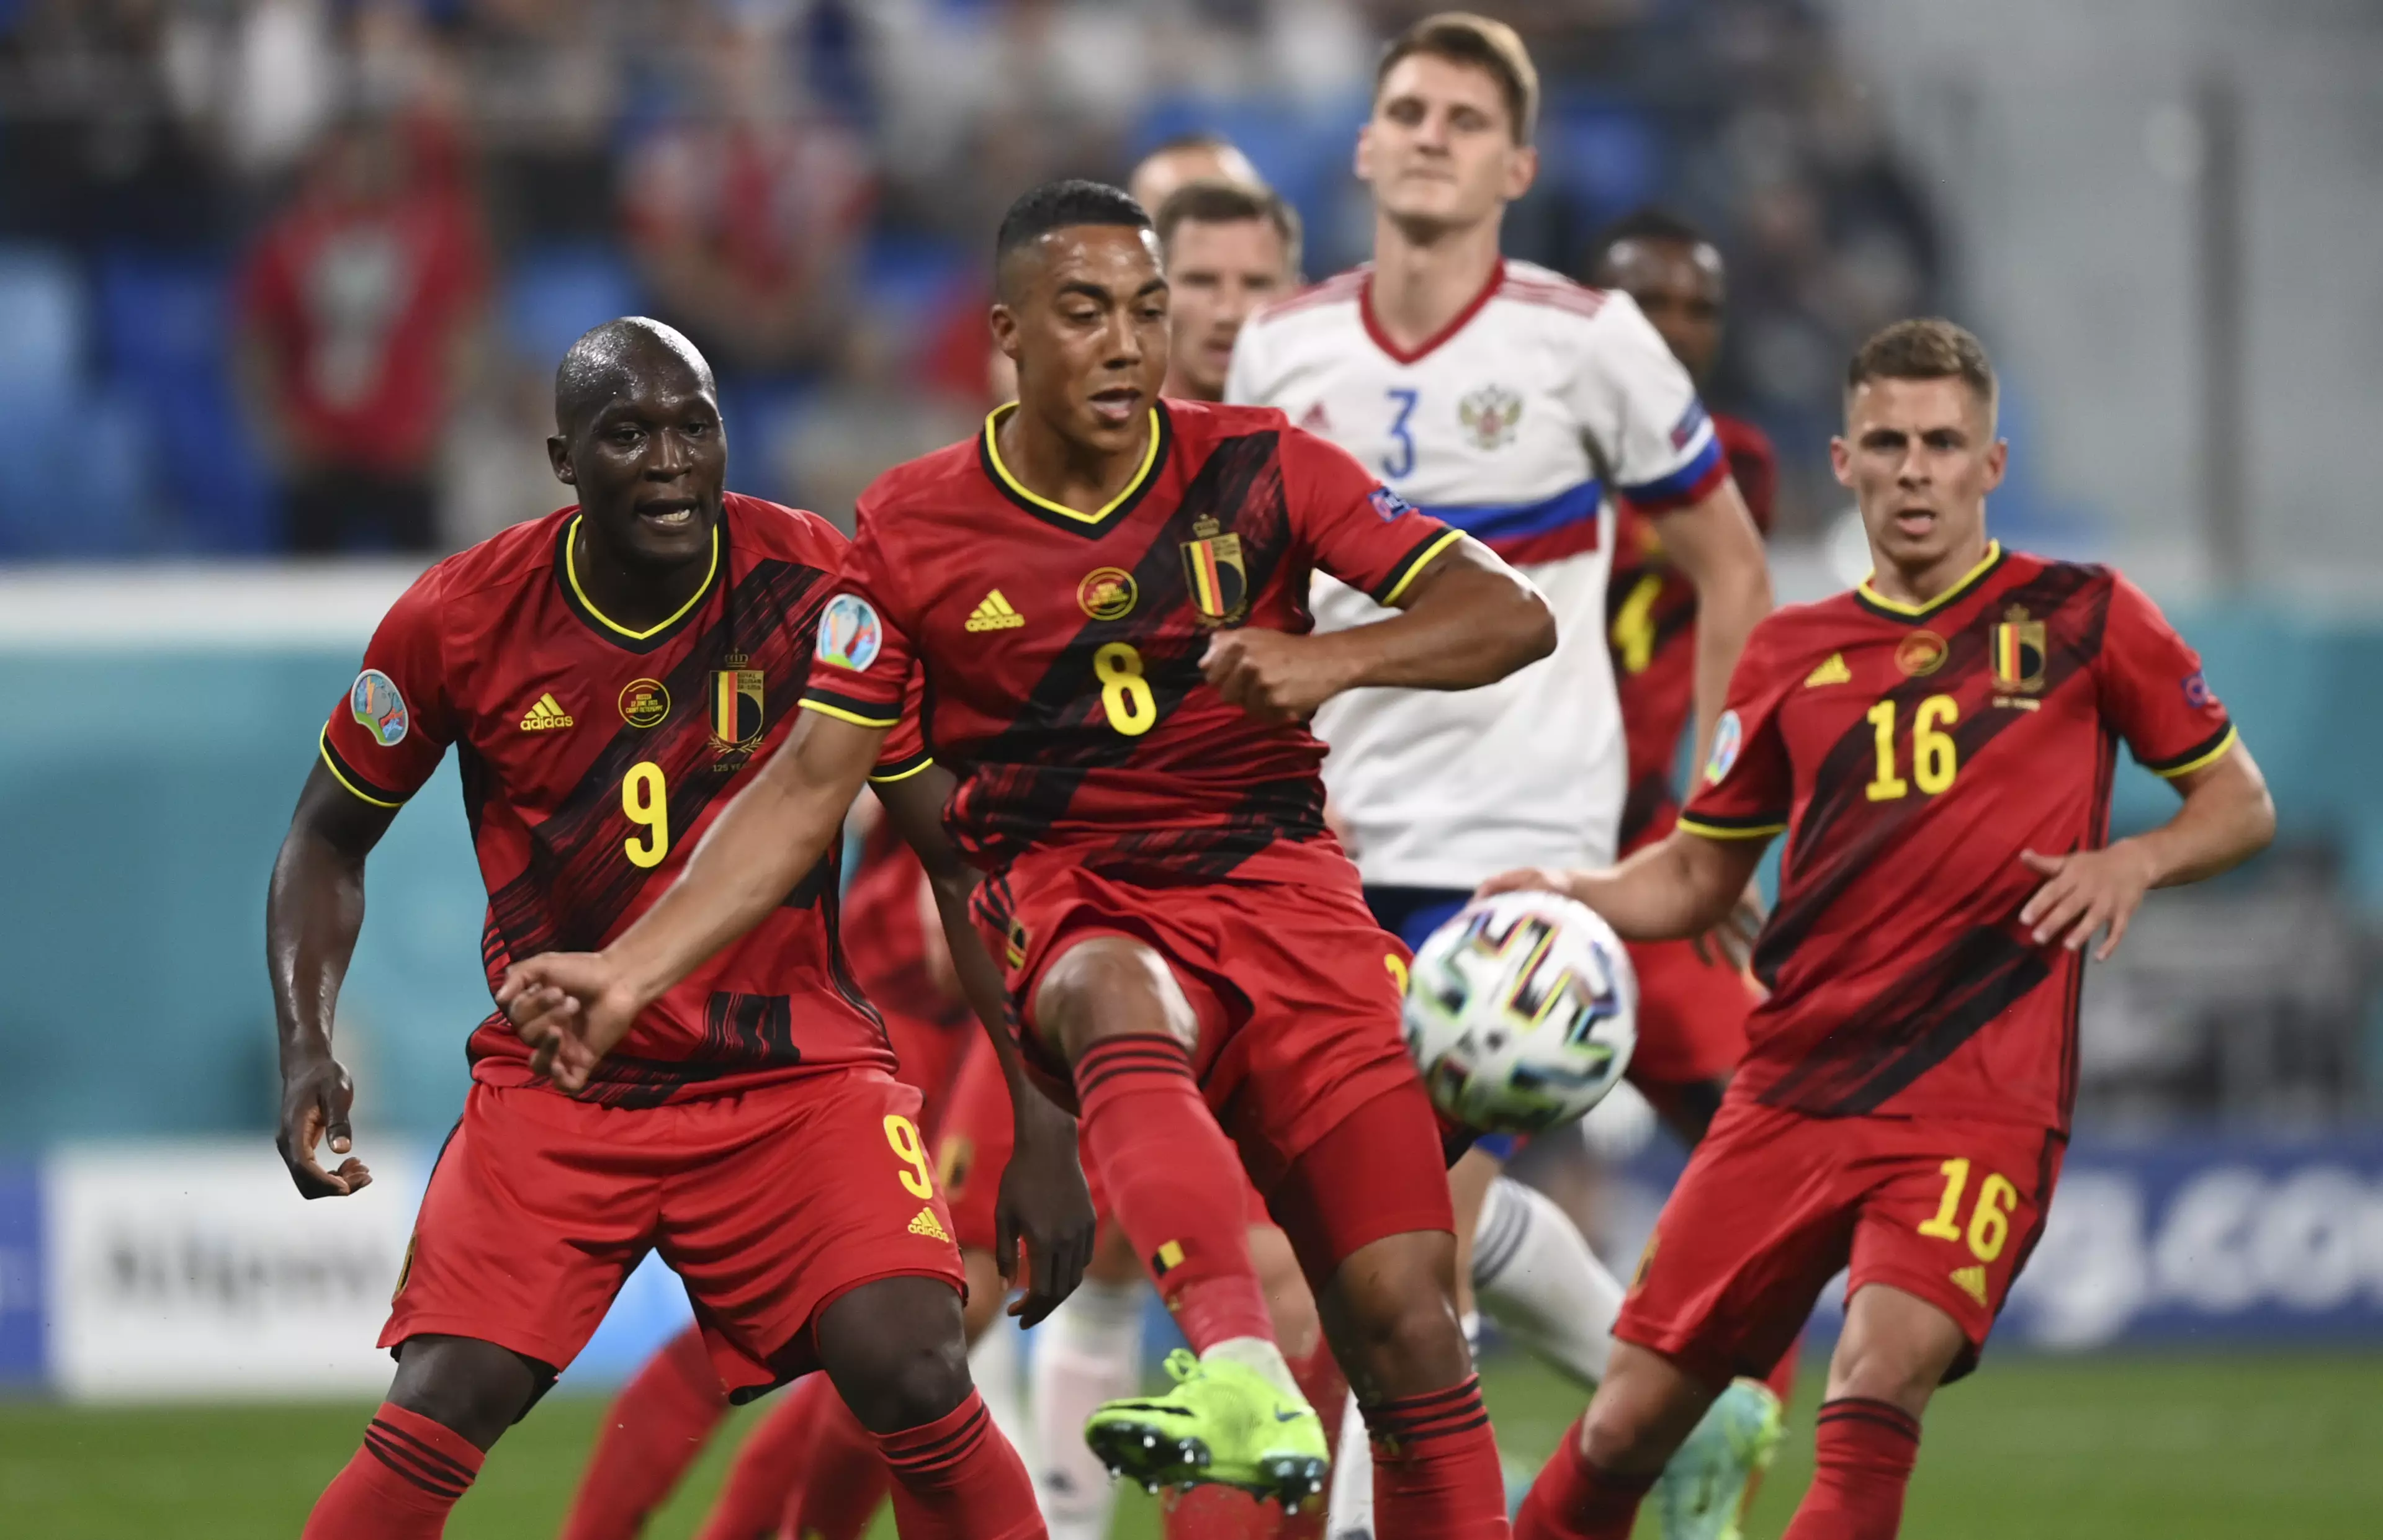 The Red Devils dominated Russia in a 3-0 triumph in their opening game